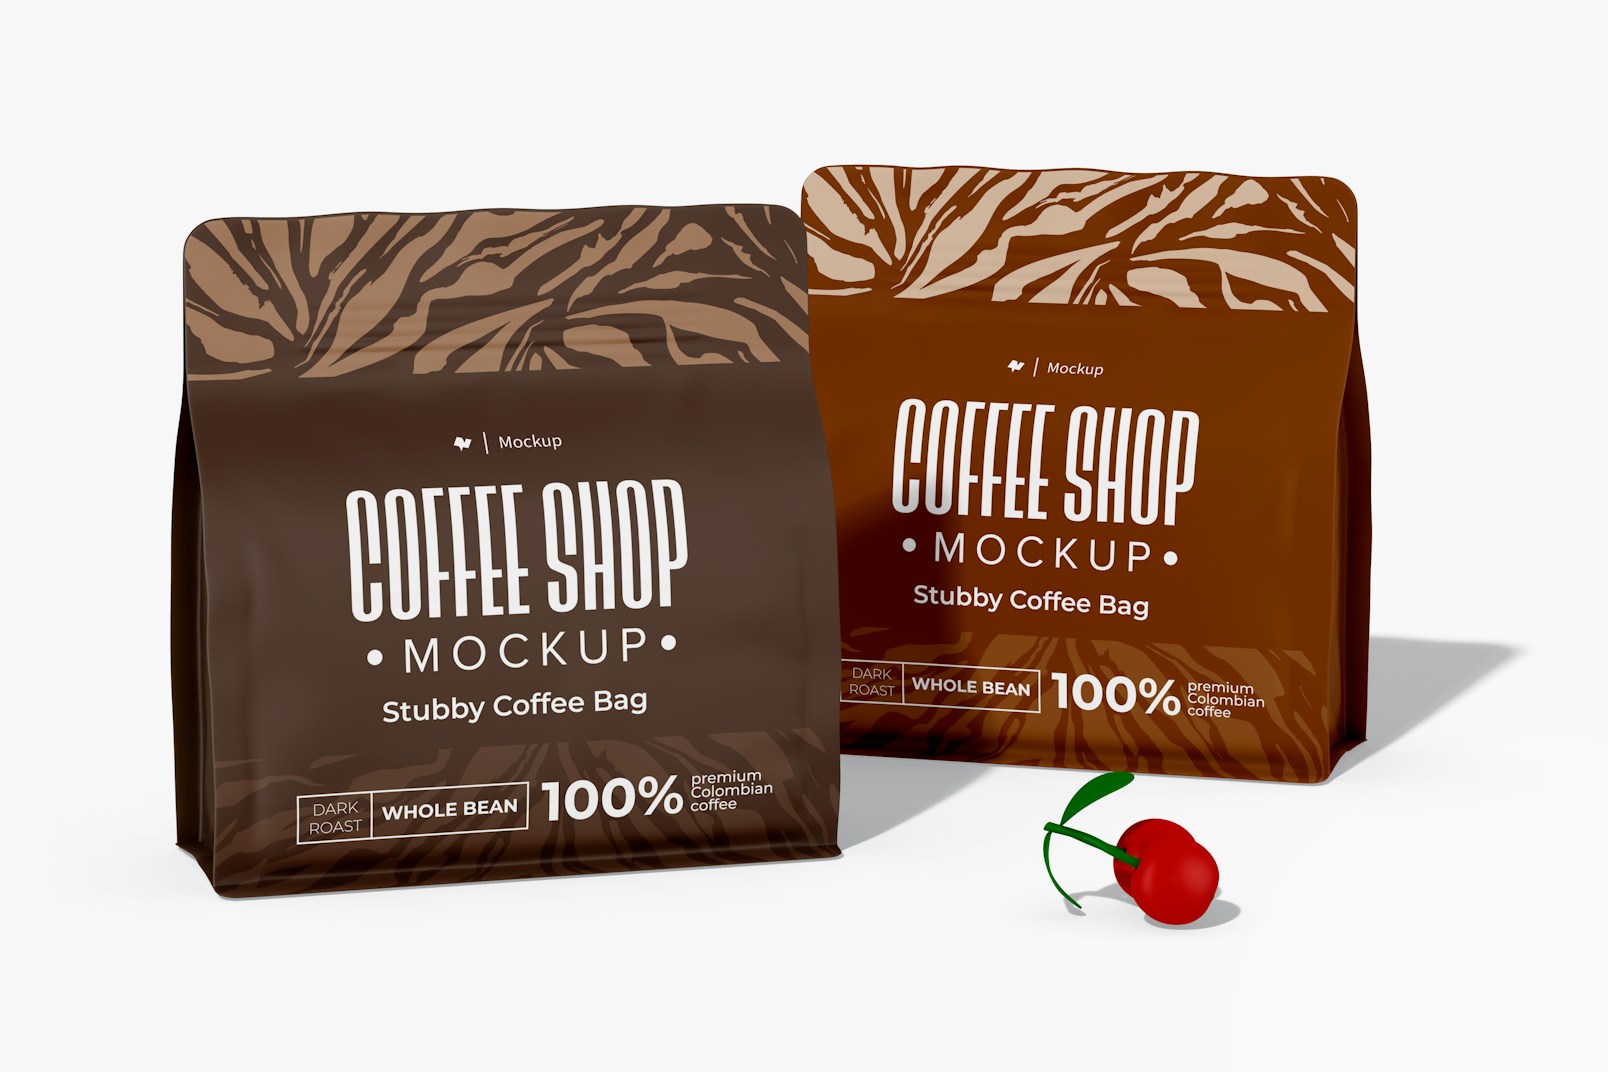 Stubby Coffee Bag Mockup, Front and Back View